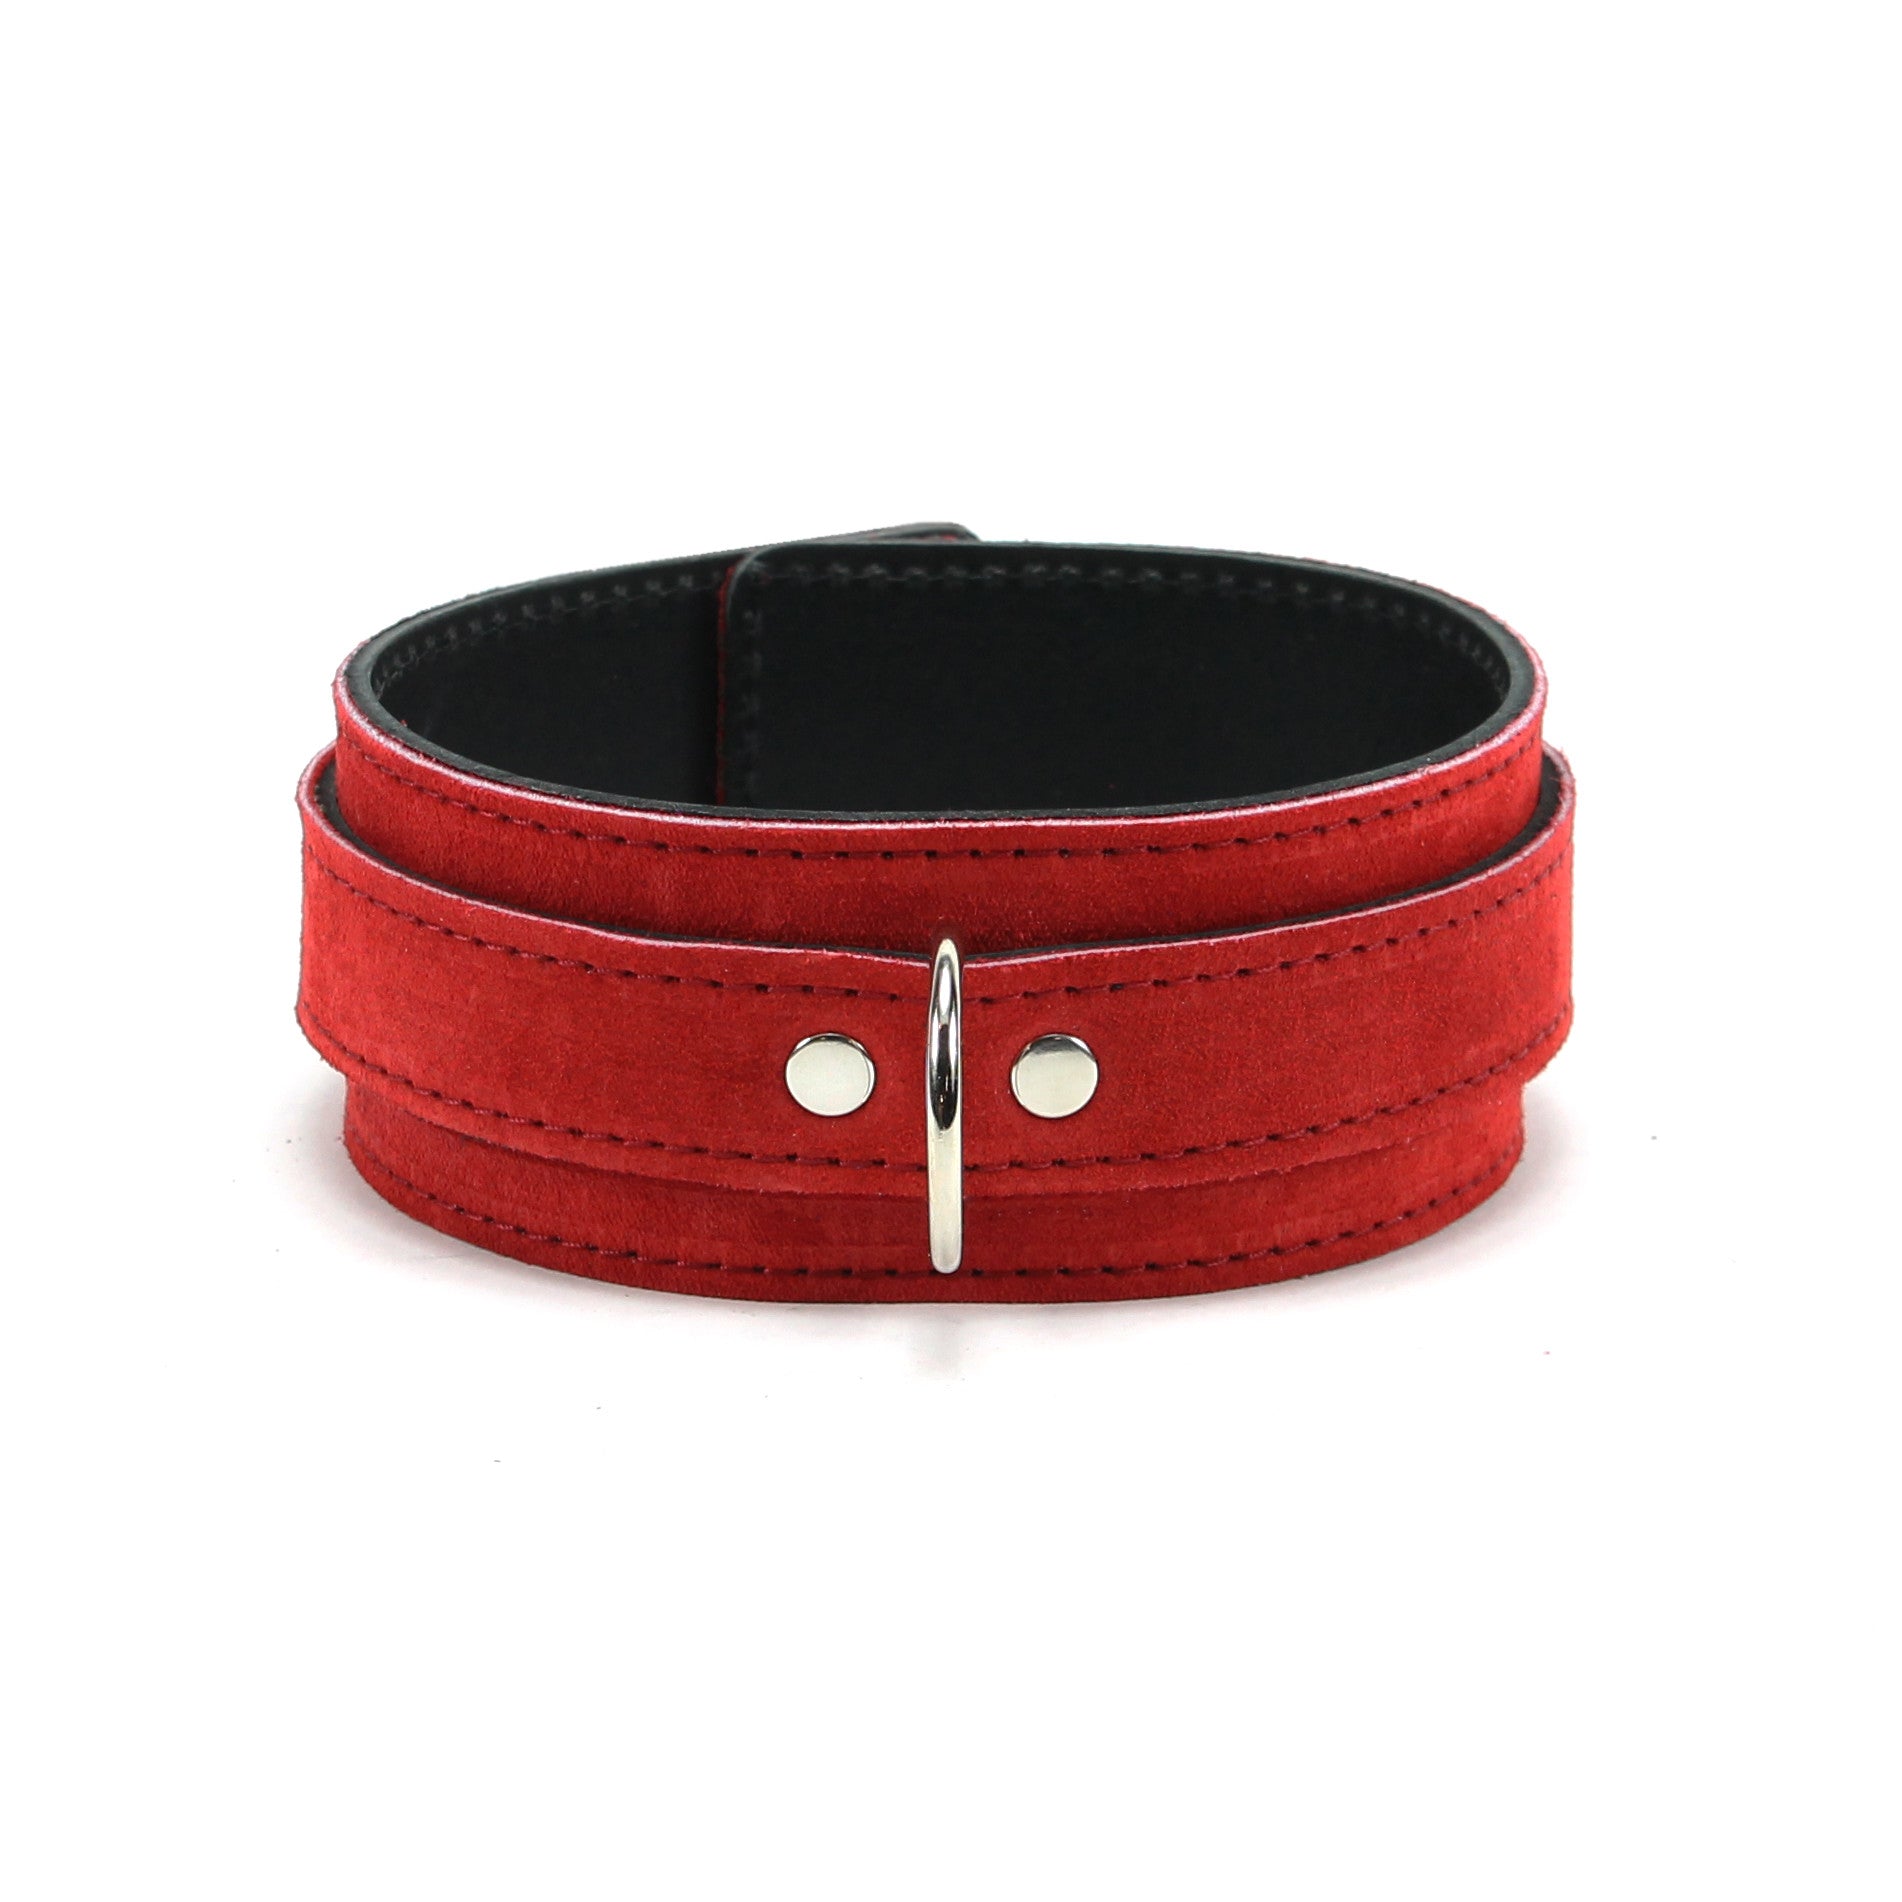 Lena Luxury Red Suede Submissive Collar with Nickel-Plated D-ring